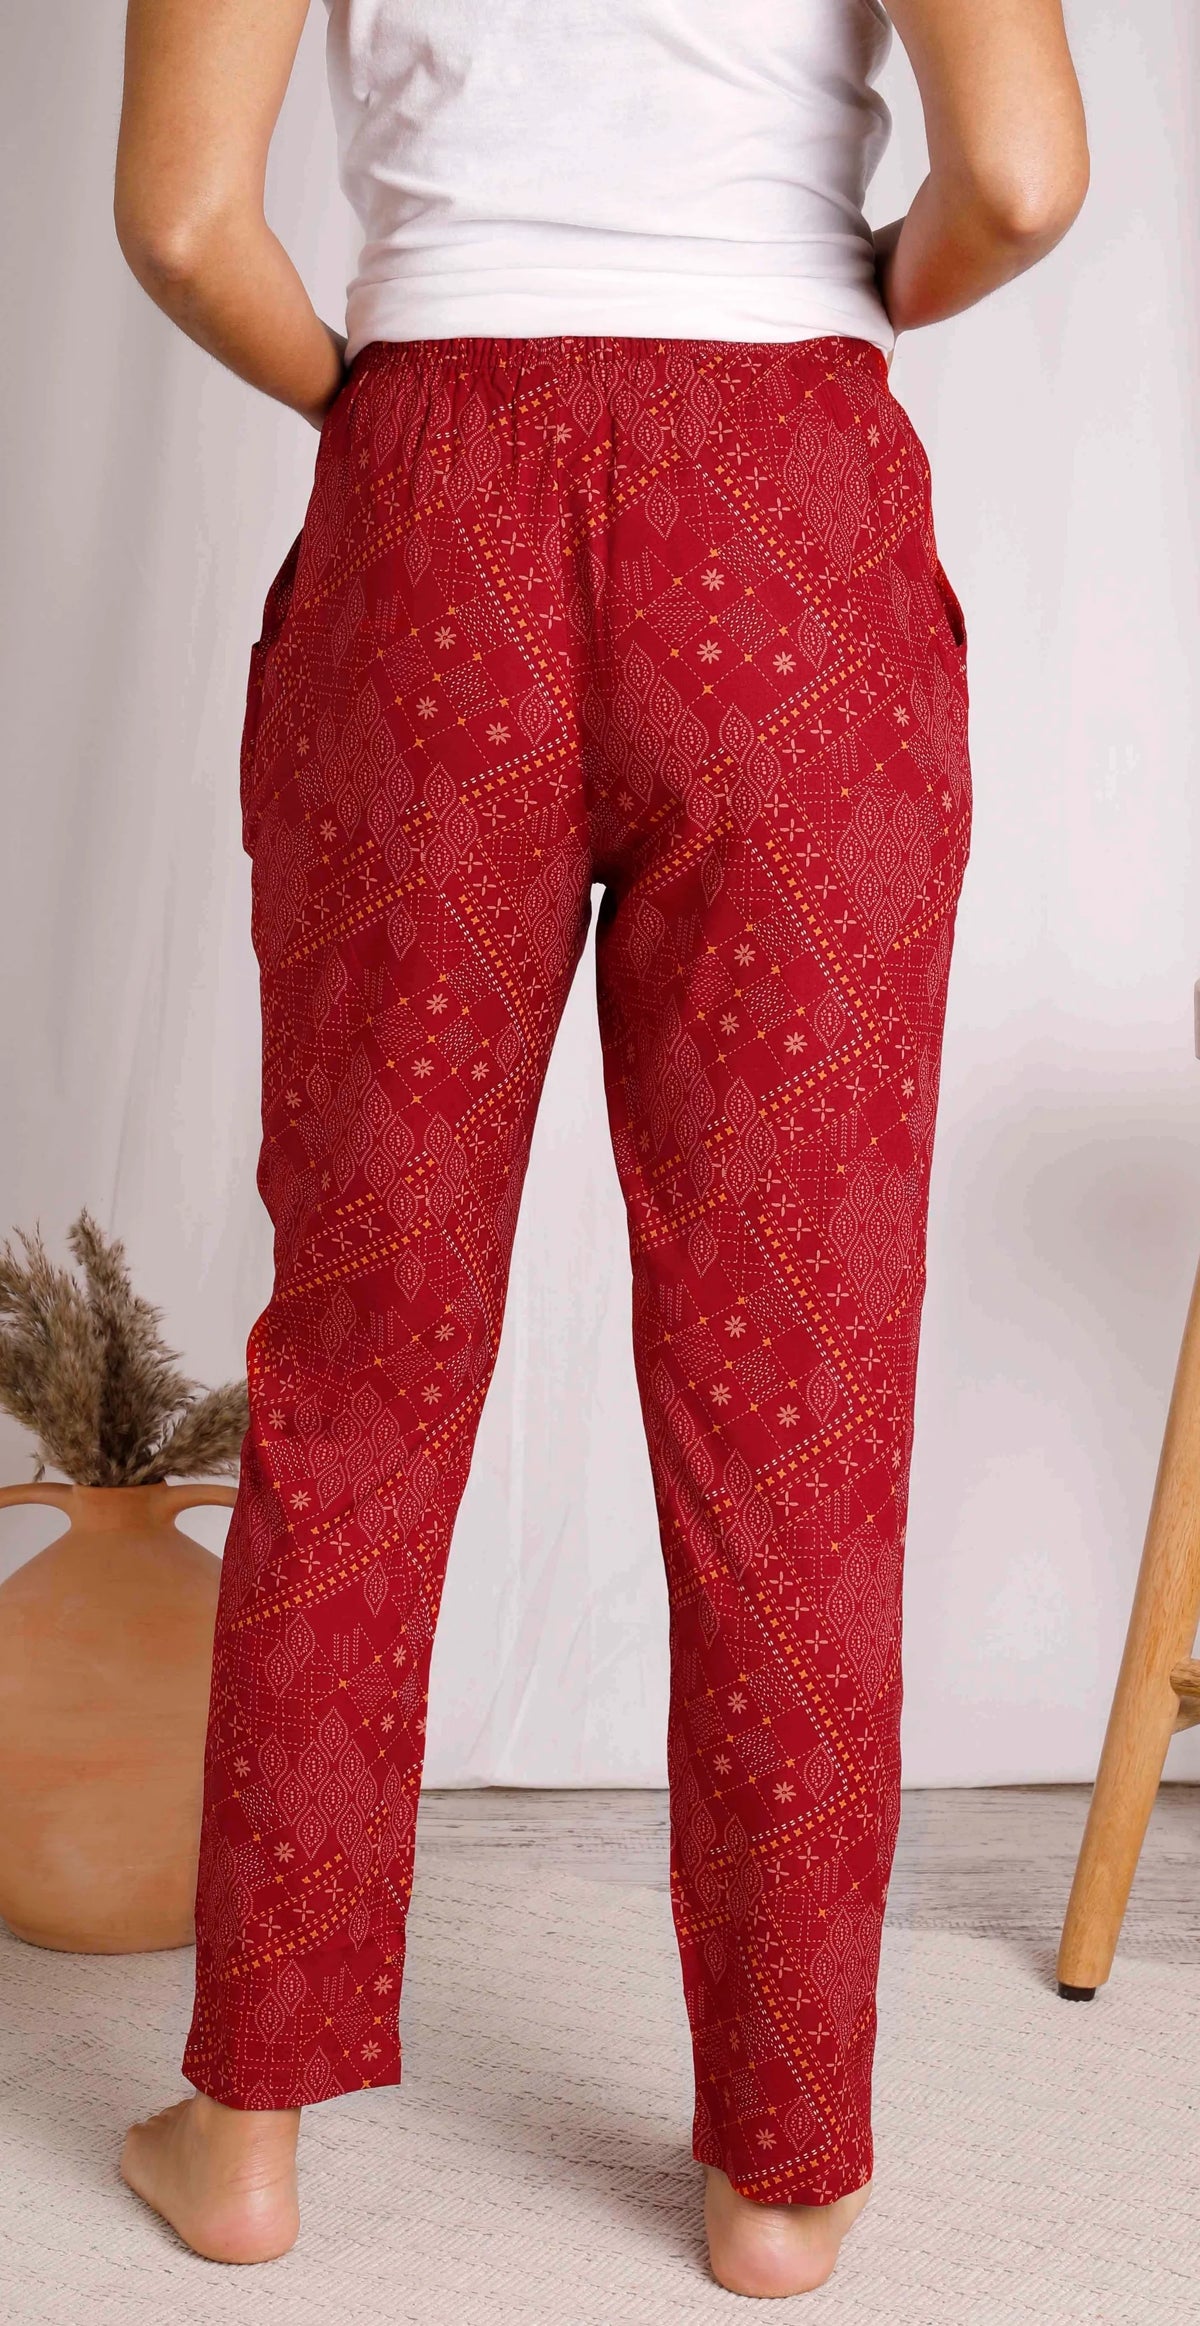 Weird Fish women's lightweight Tinto viscose fabric in Chilli Red with a Moroccan style print.